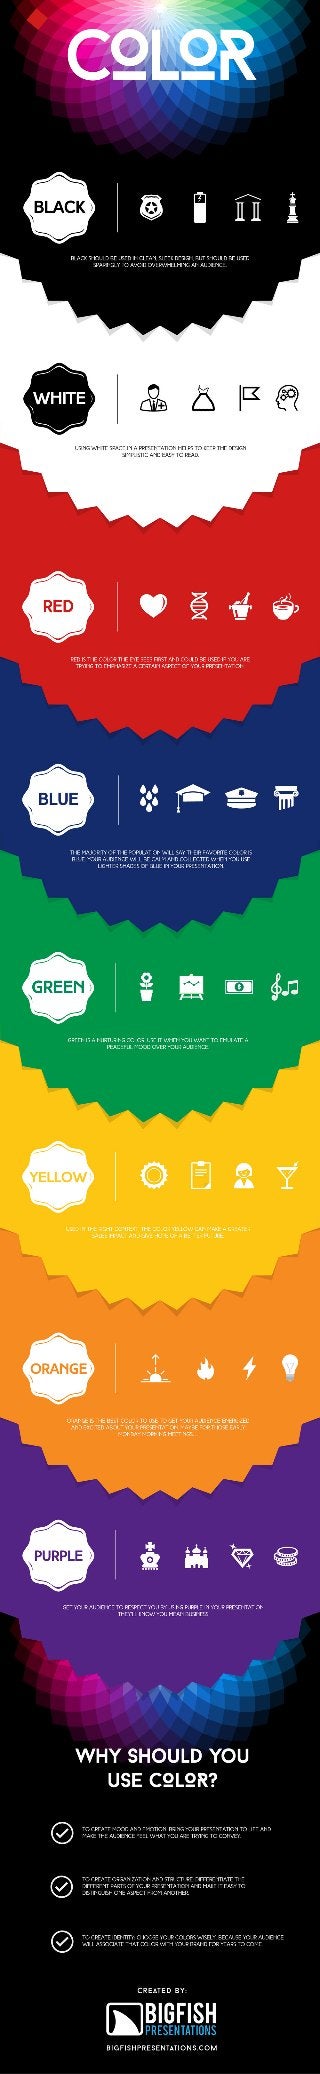 The Psychology of Color in Presentations (Infographic)